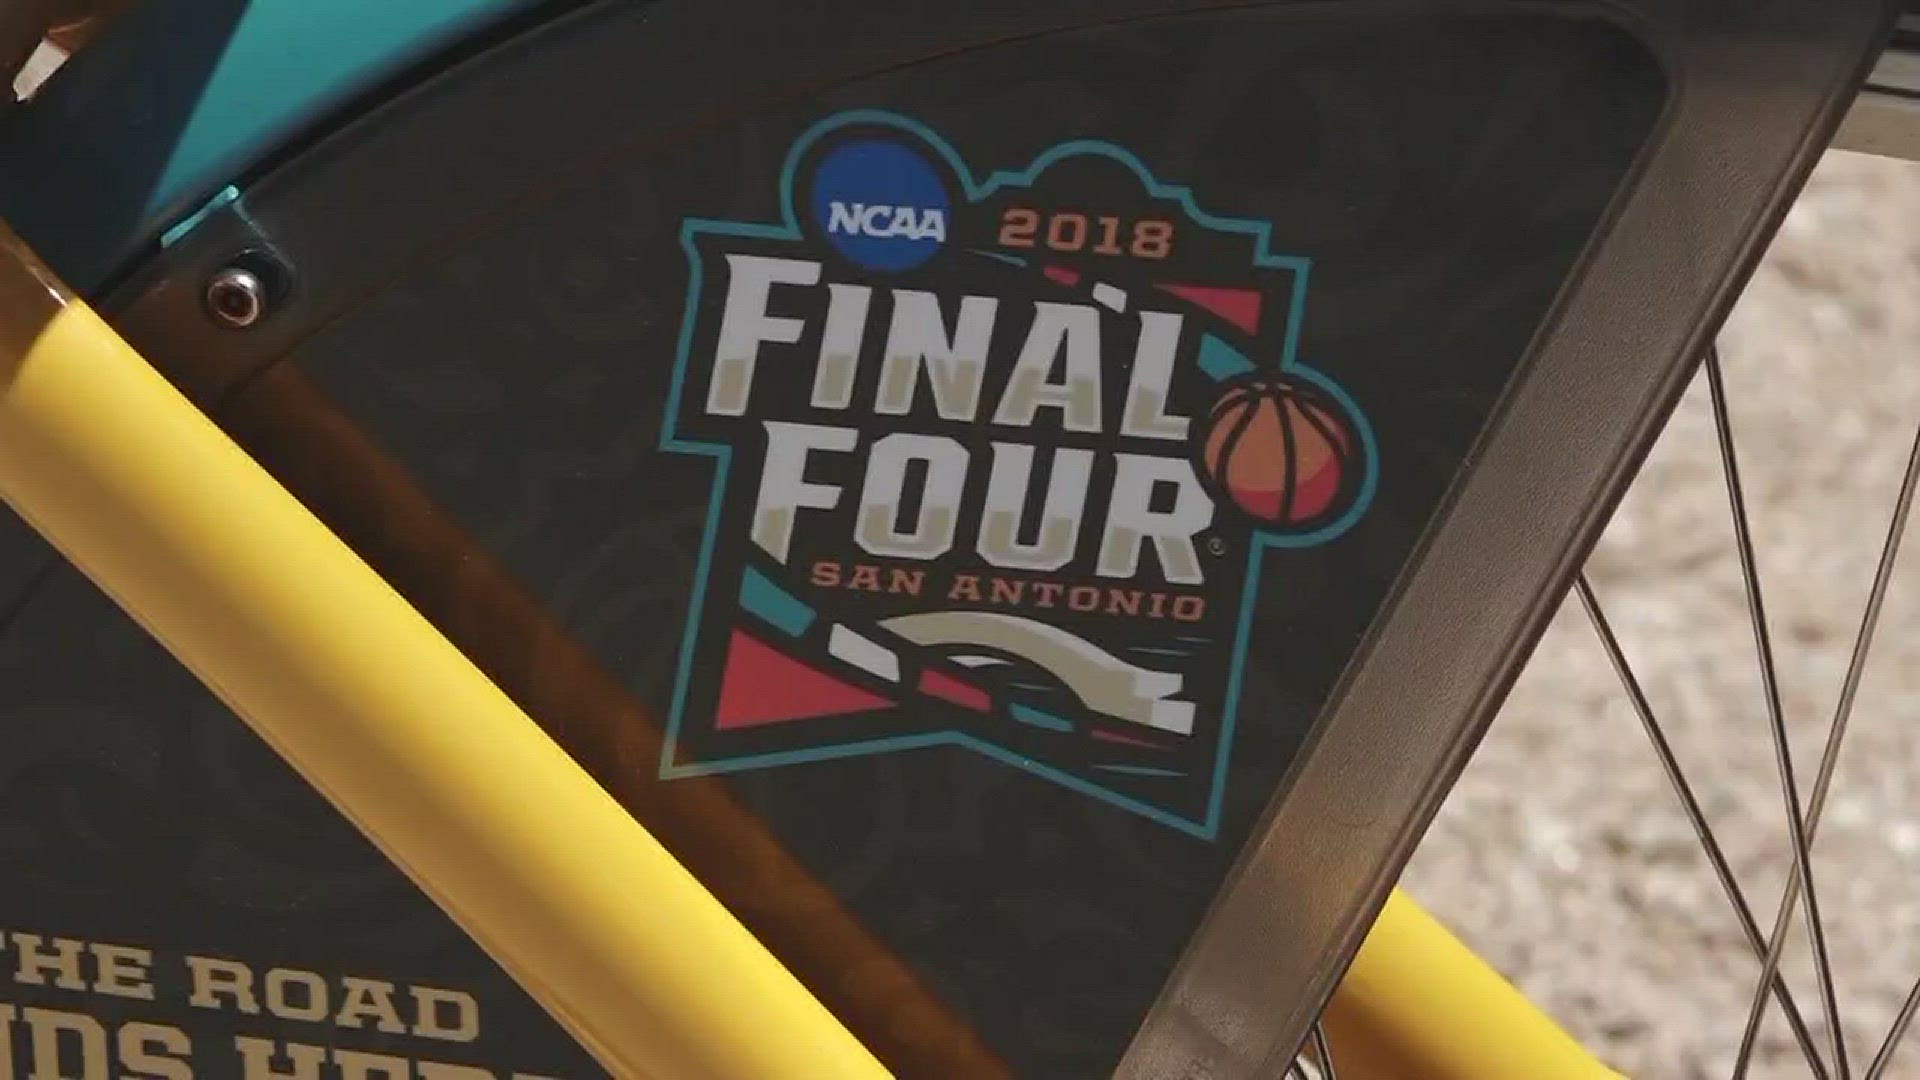 Next year the Final Four comes to the Alamo City, and the excitement is already underway. San Antonio Bike Share and the Final Four have partnered up to start promoting next year's championship.